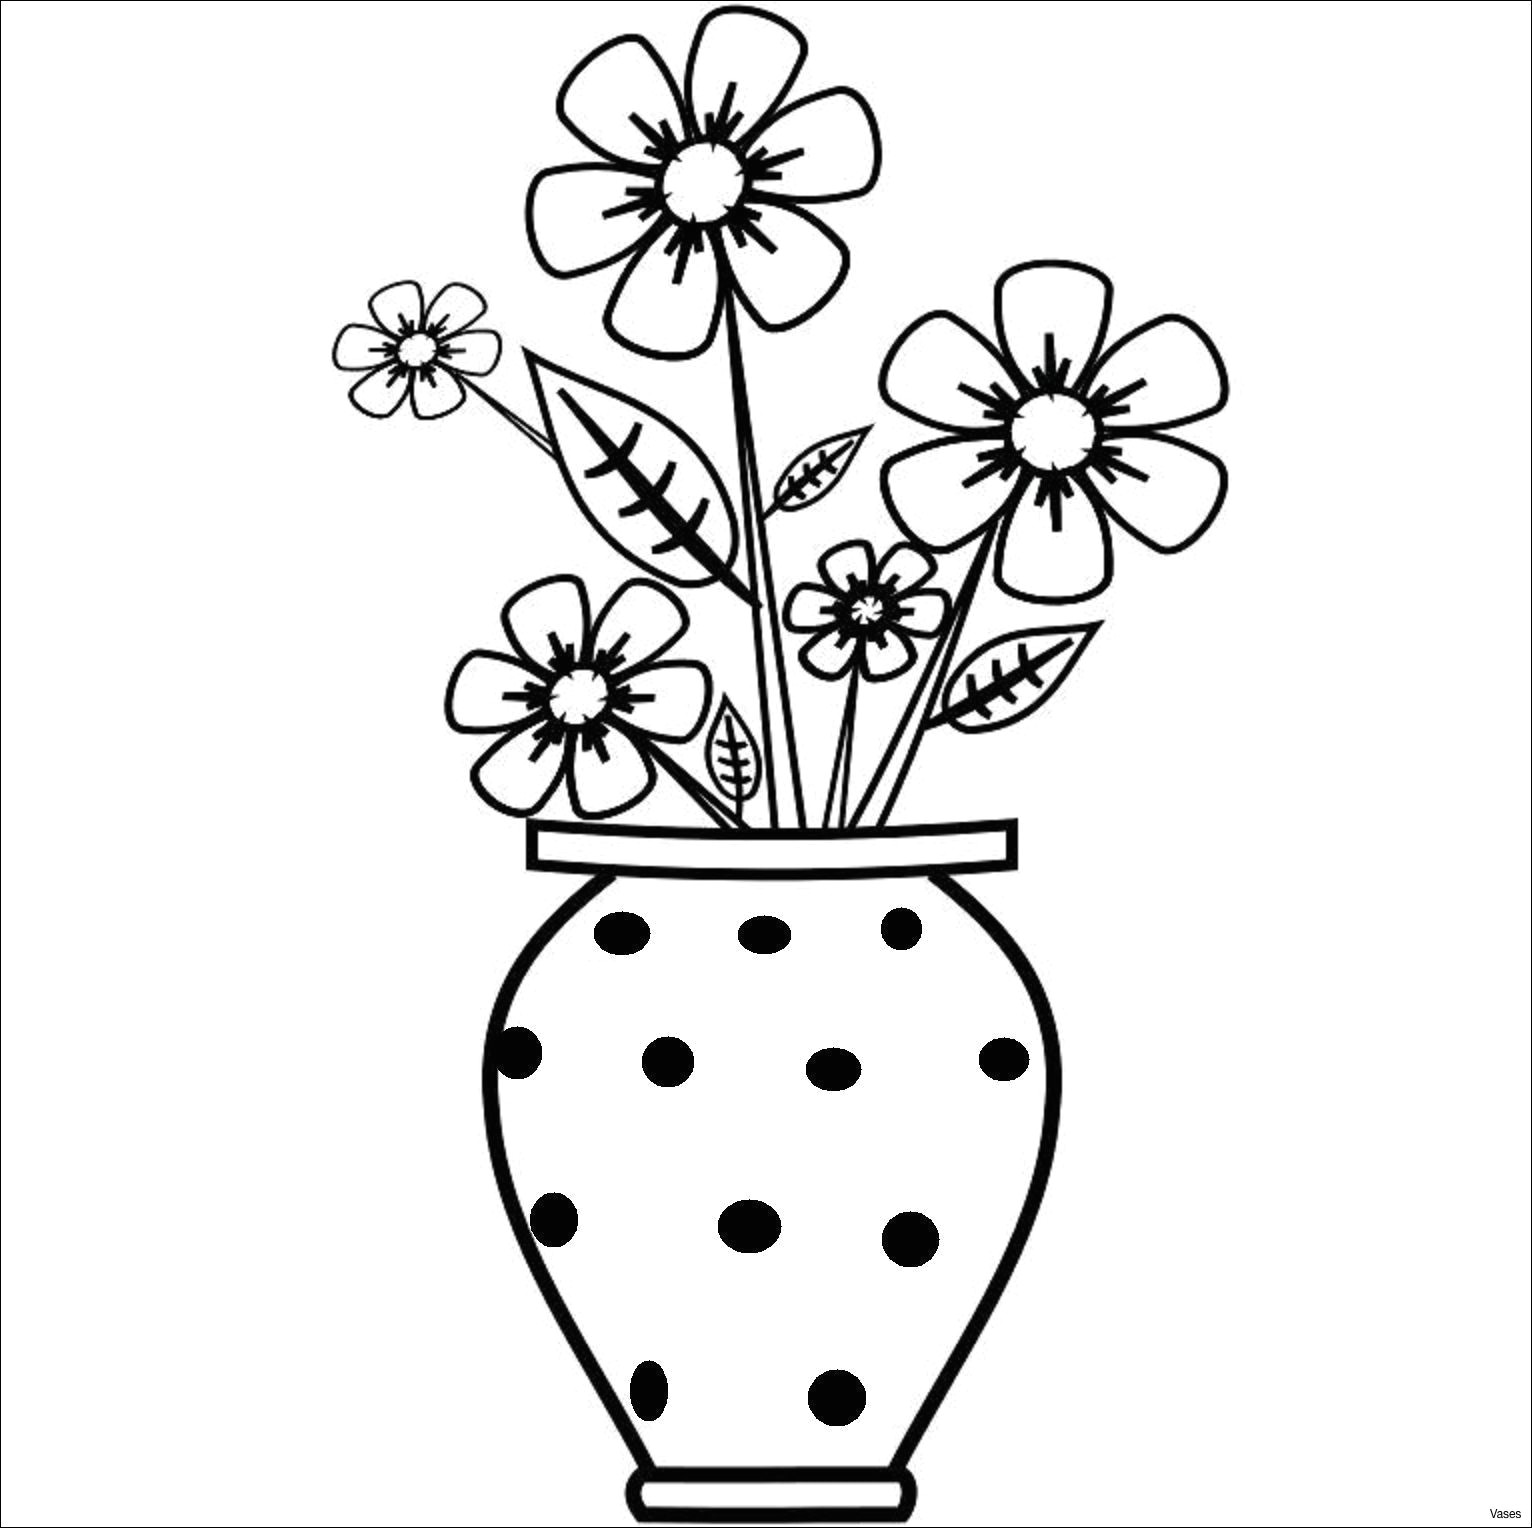 Drawings T Account Pics Of Drawings Easy Vase Art Drawings How to Draw A Vase Step 2h